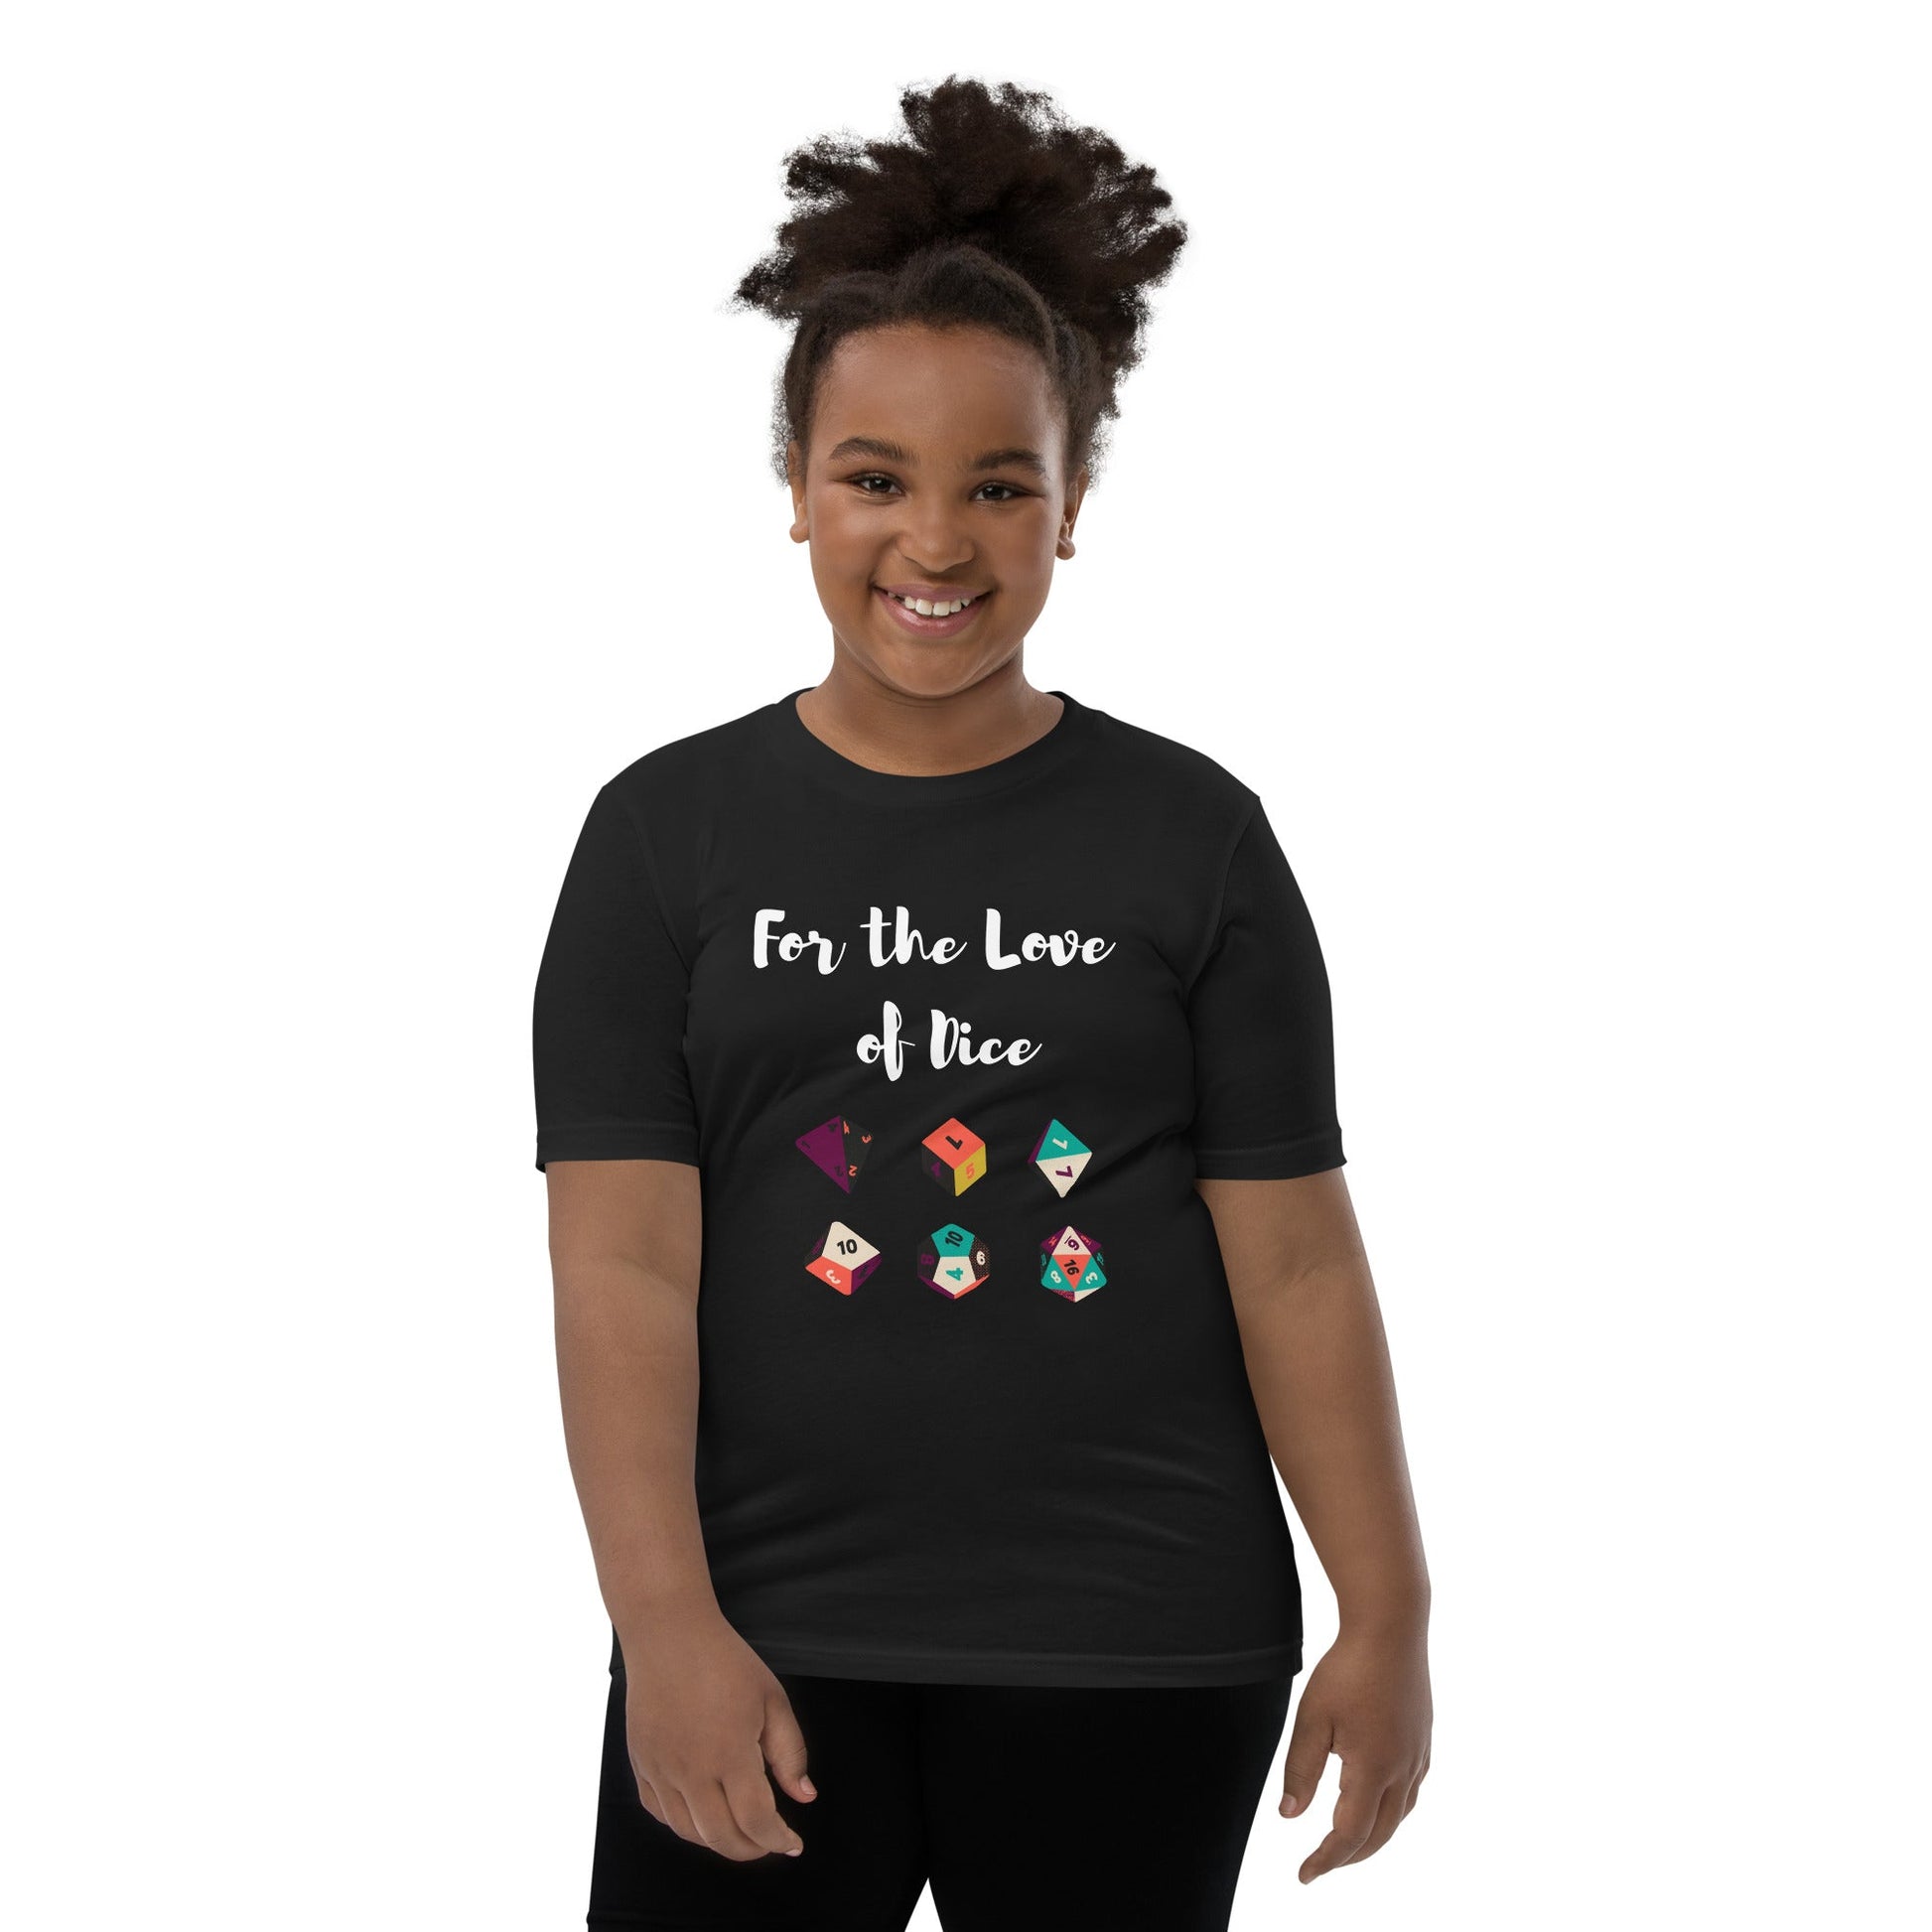 For the Love of Dice | Youth Short Sleeve T-Shirt